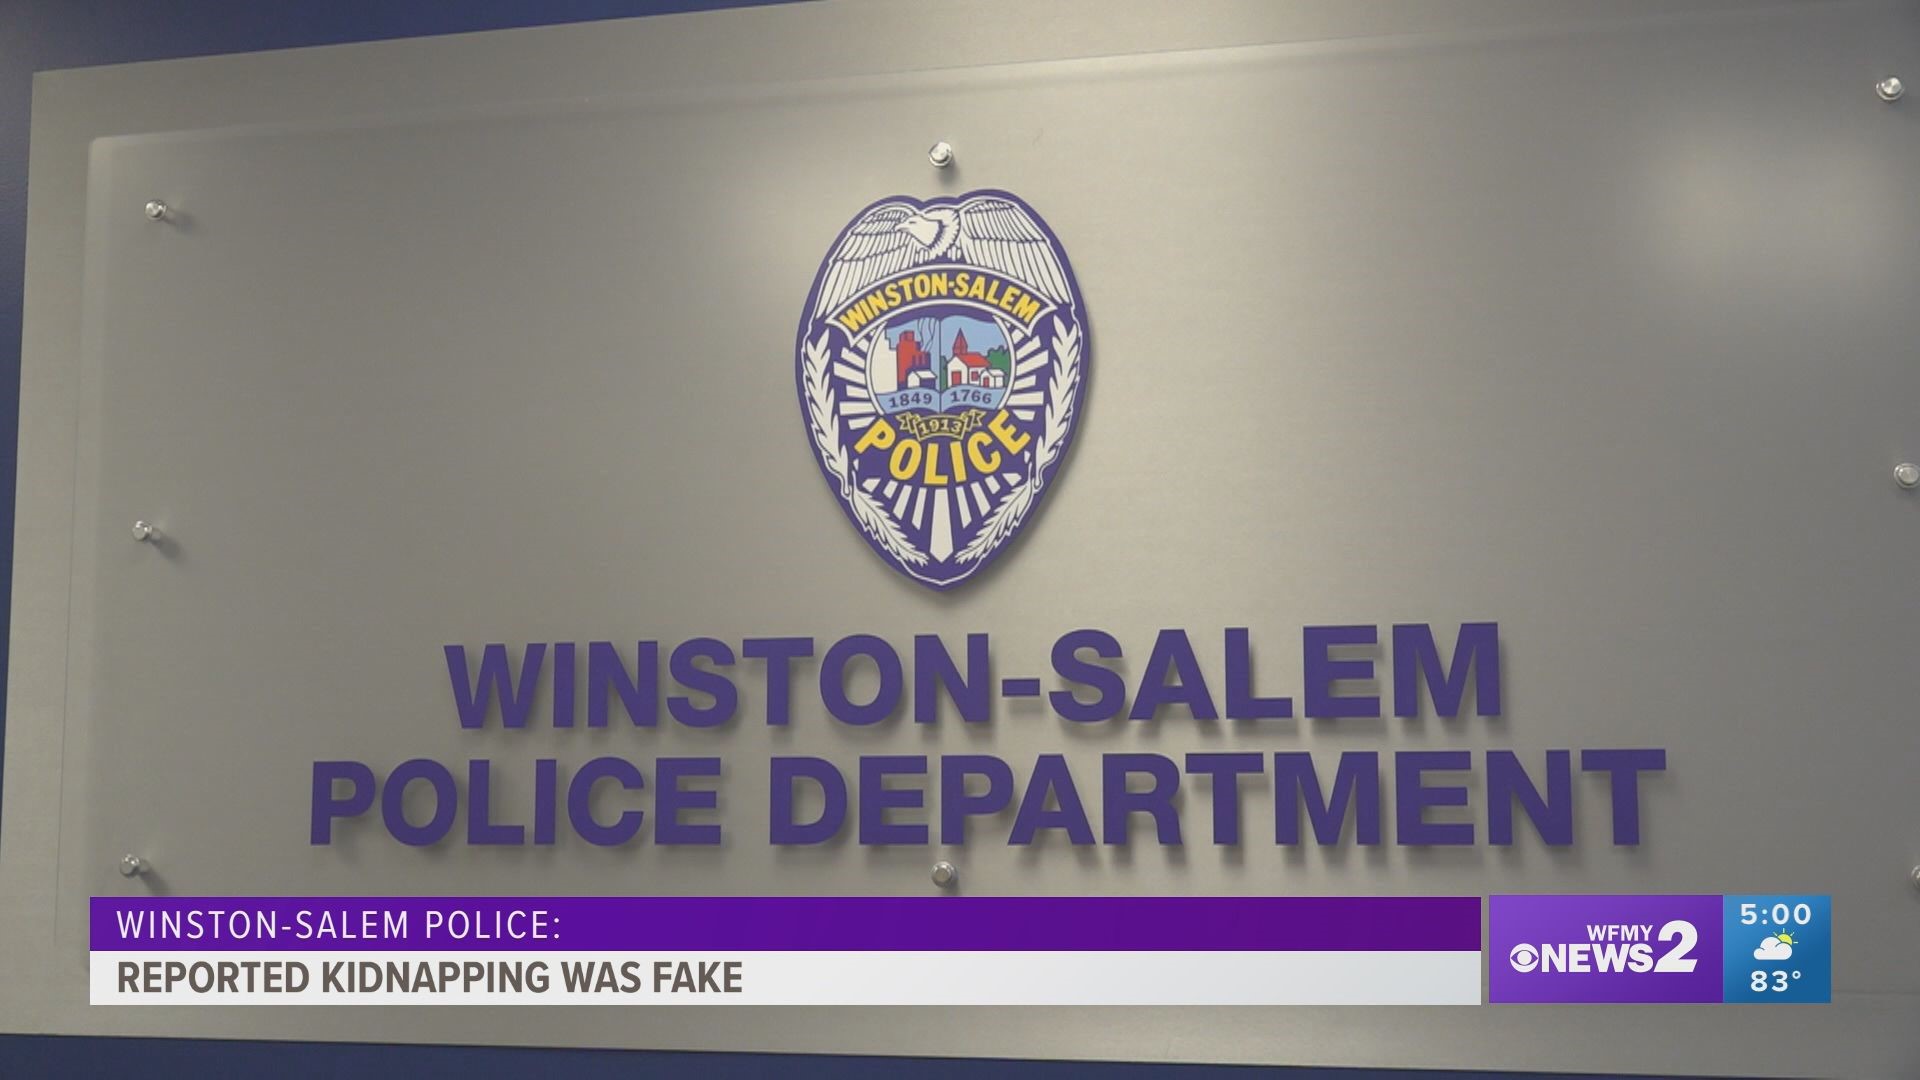 Winston-Salem police say a kidnapping that resulted in an Amber Alert was fake.